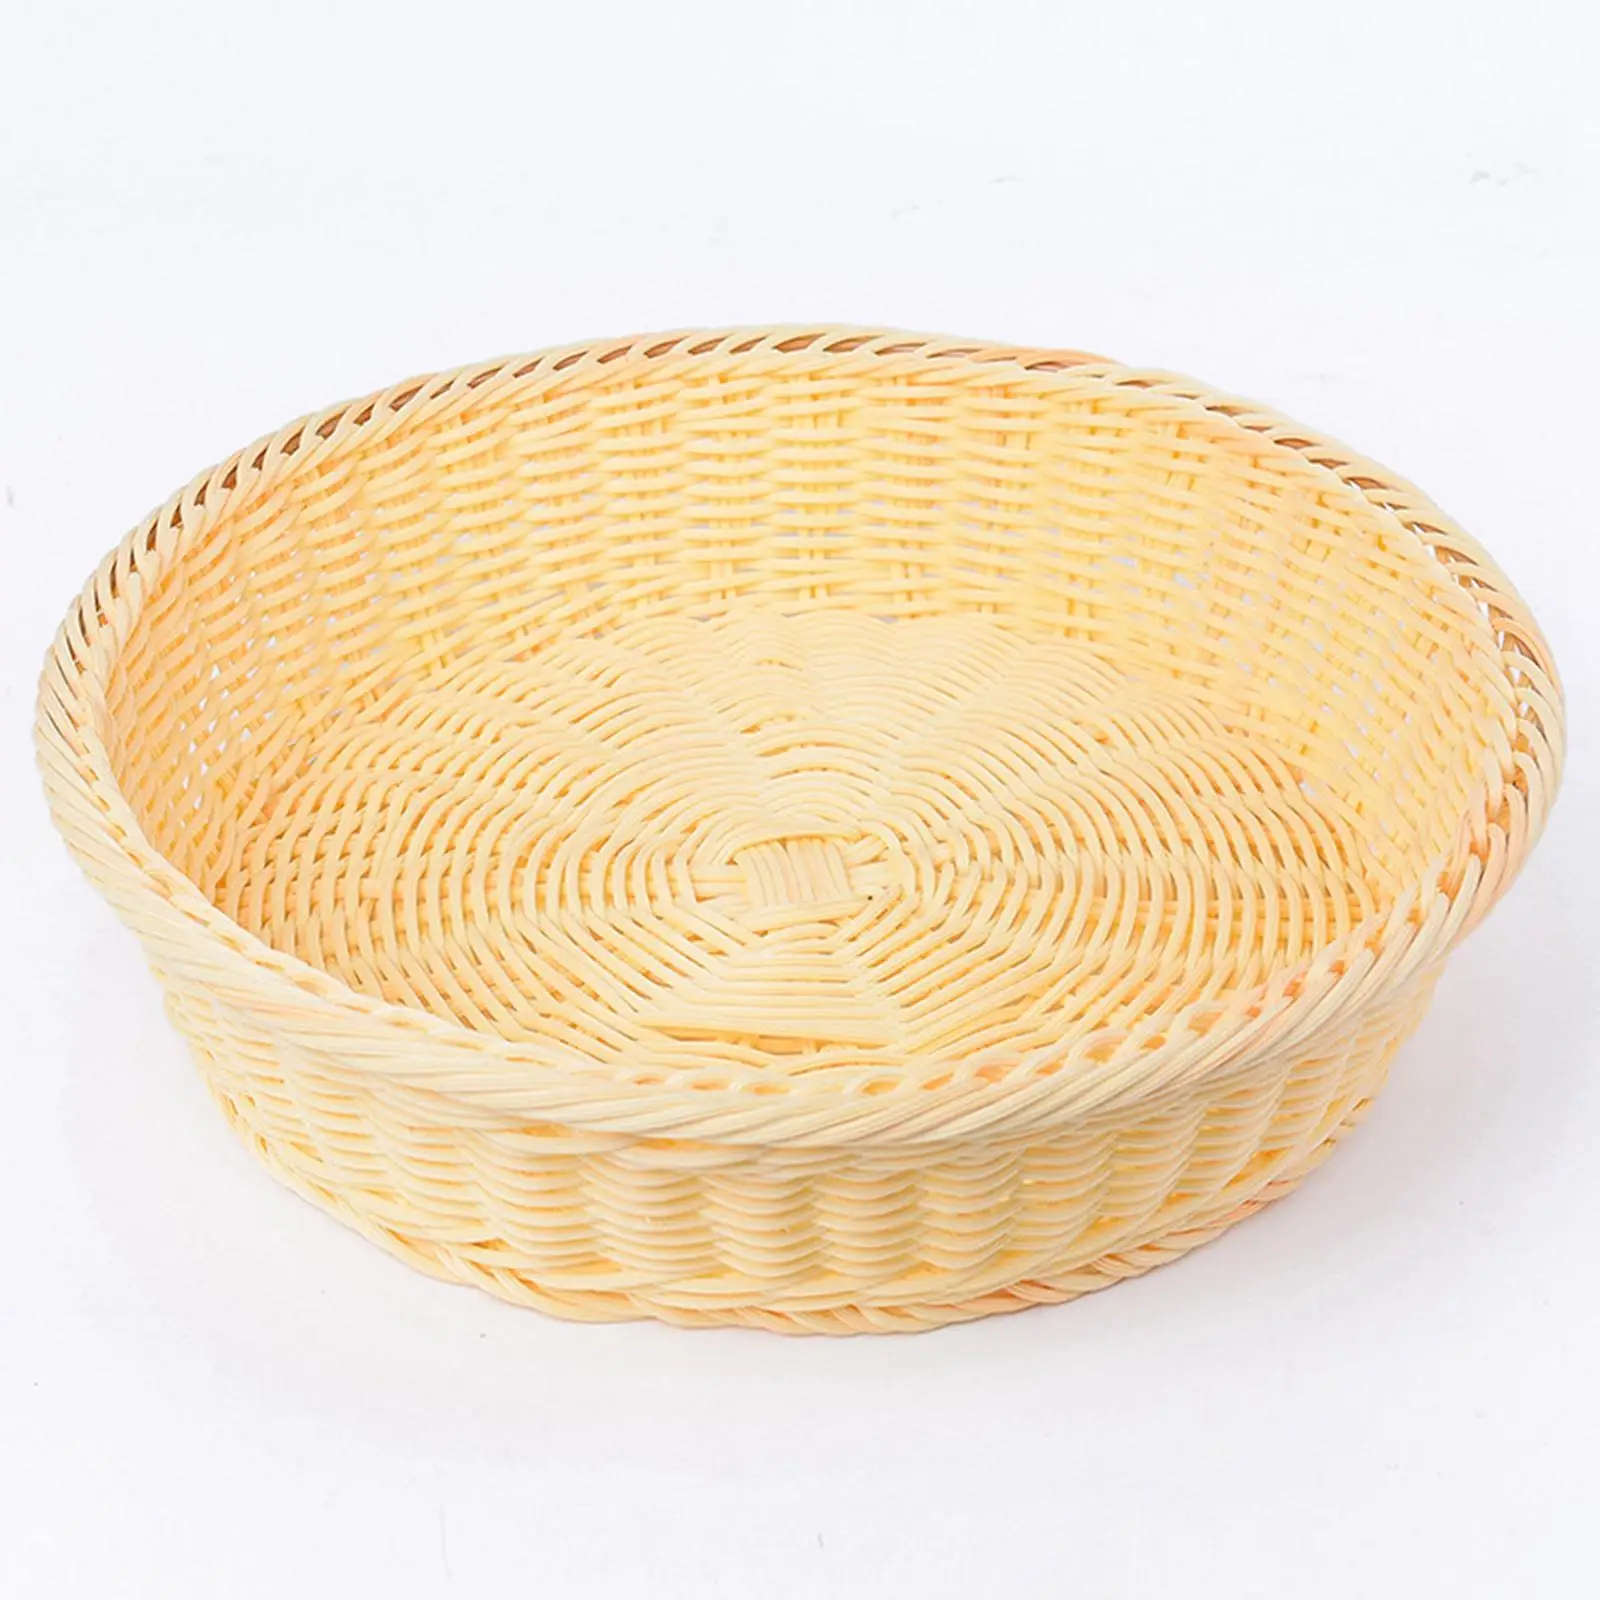 Wicker Woven Bread Basket Tabletop Food Serving Baskets Tray for Fruits Breakfast Home Vegetables Dining Coffee Table